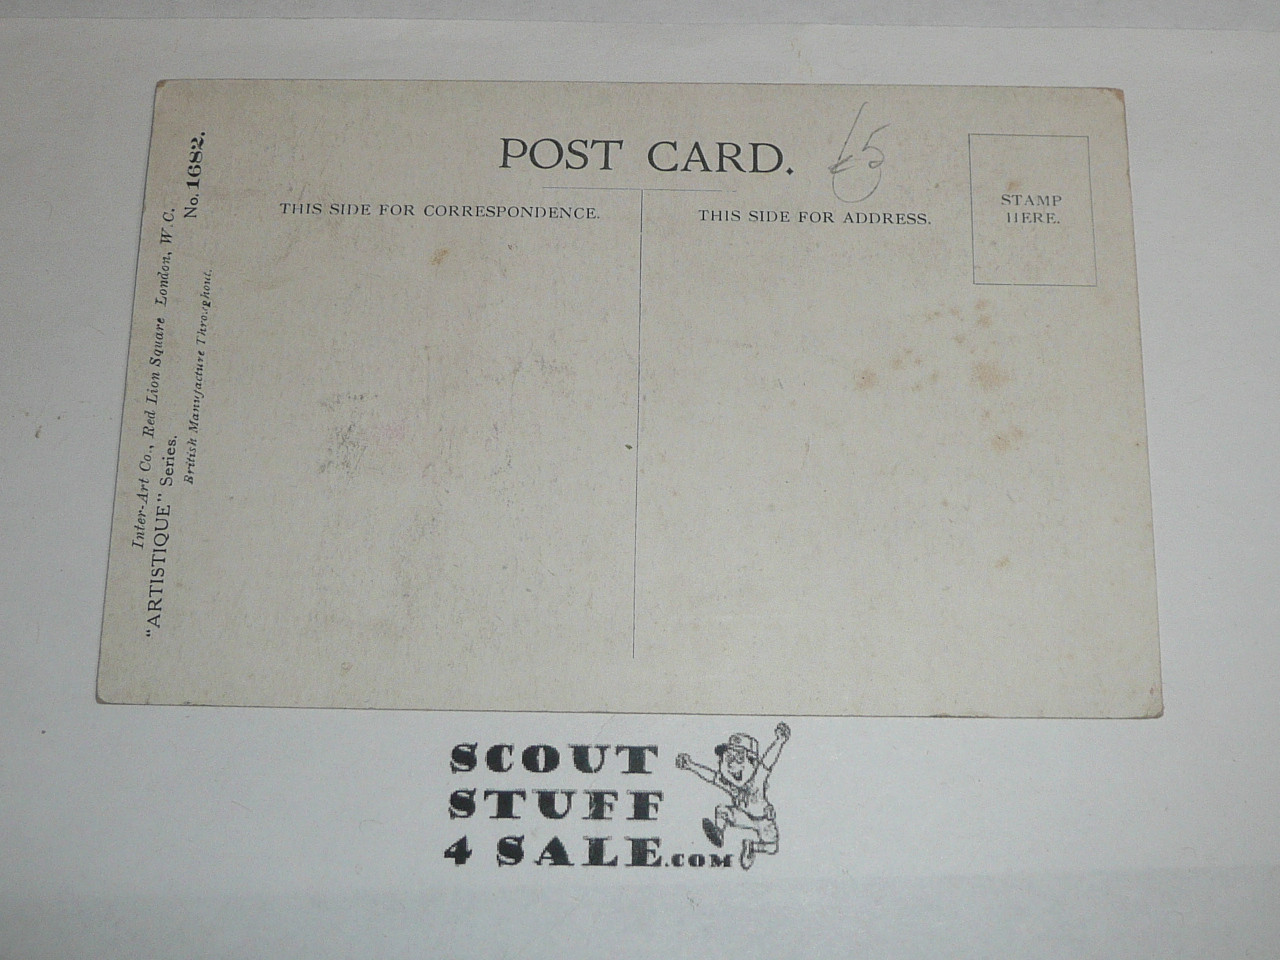 1914 British Boy Scout Postcard, What Little We Do We're Doing Well